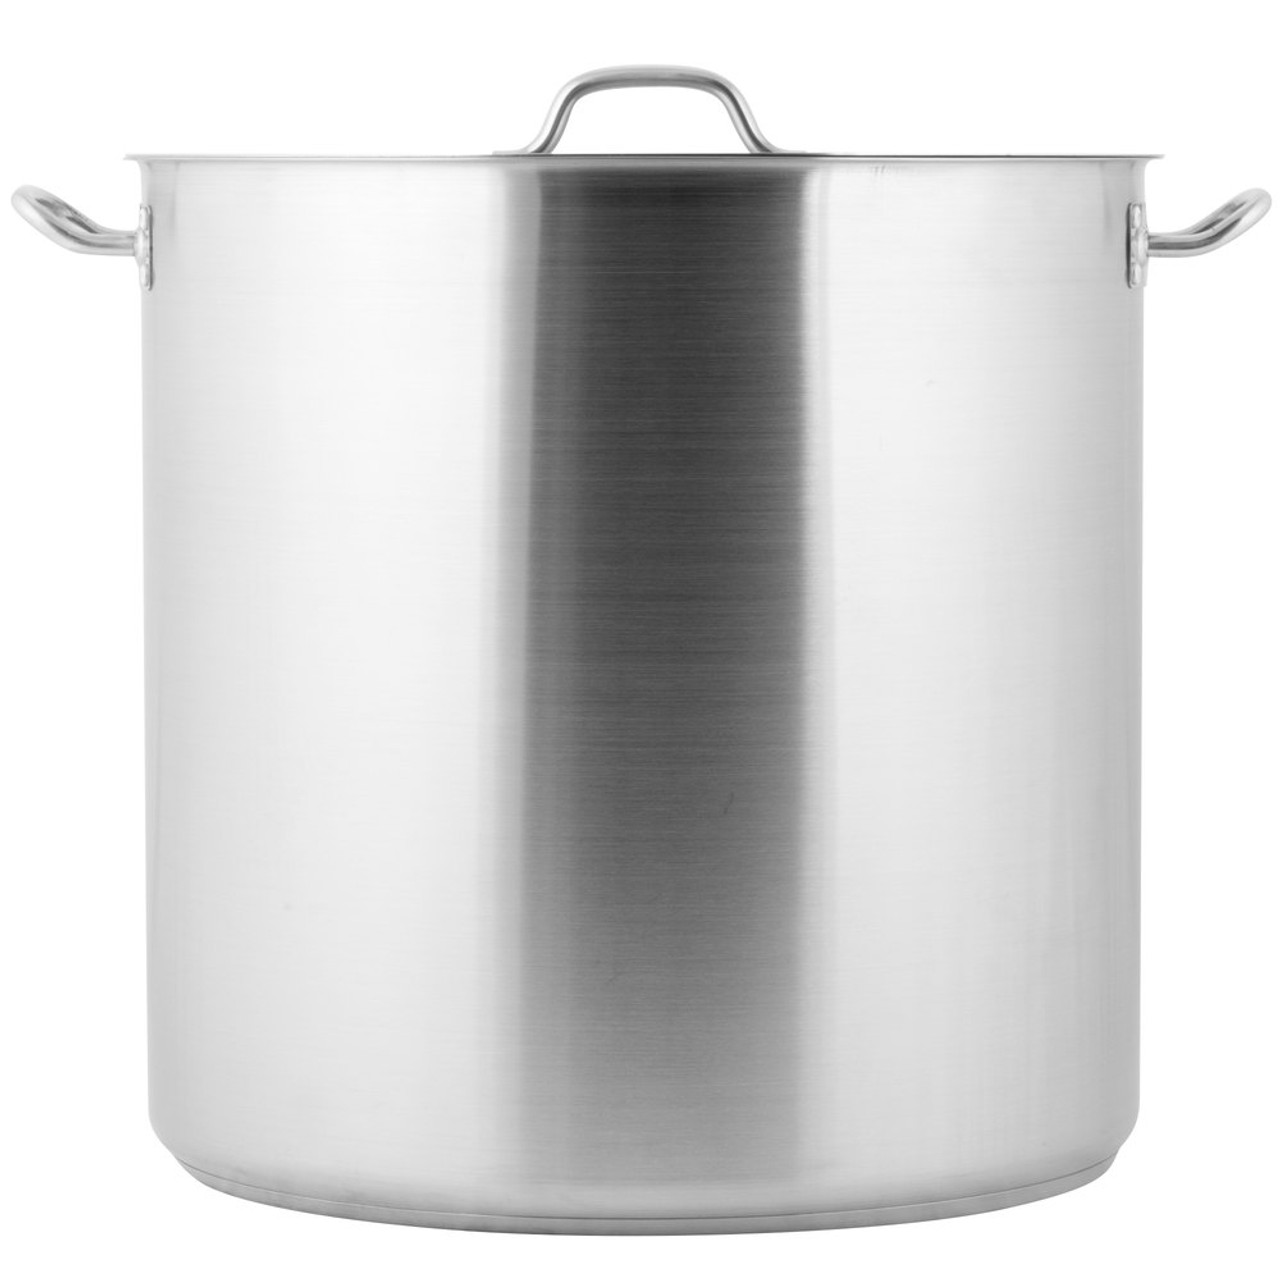 100 Qt. Heavy-Duty Stainless Steel Stock Pot with Cover